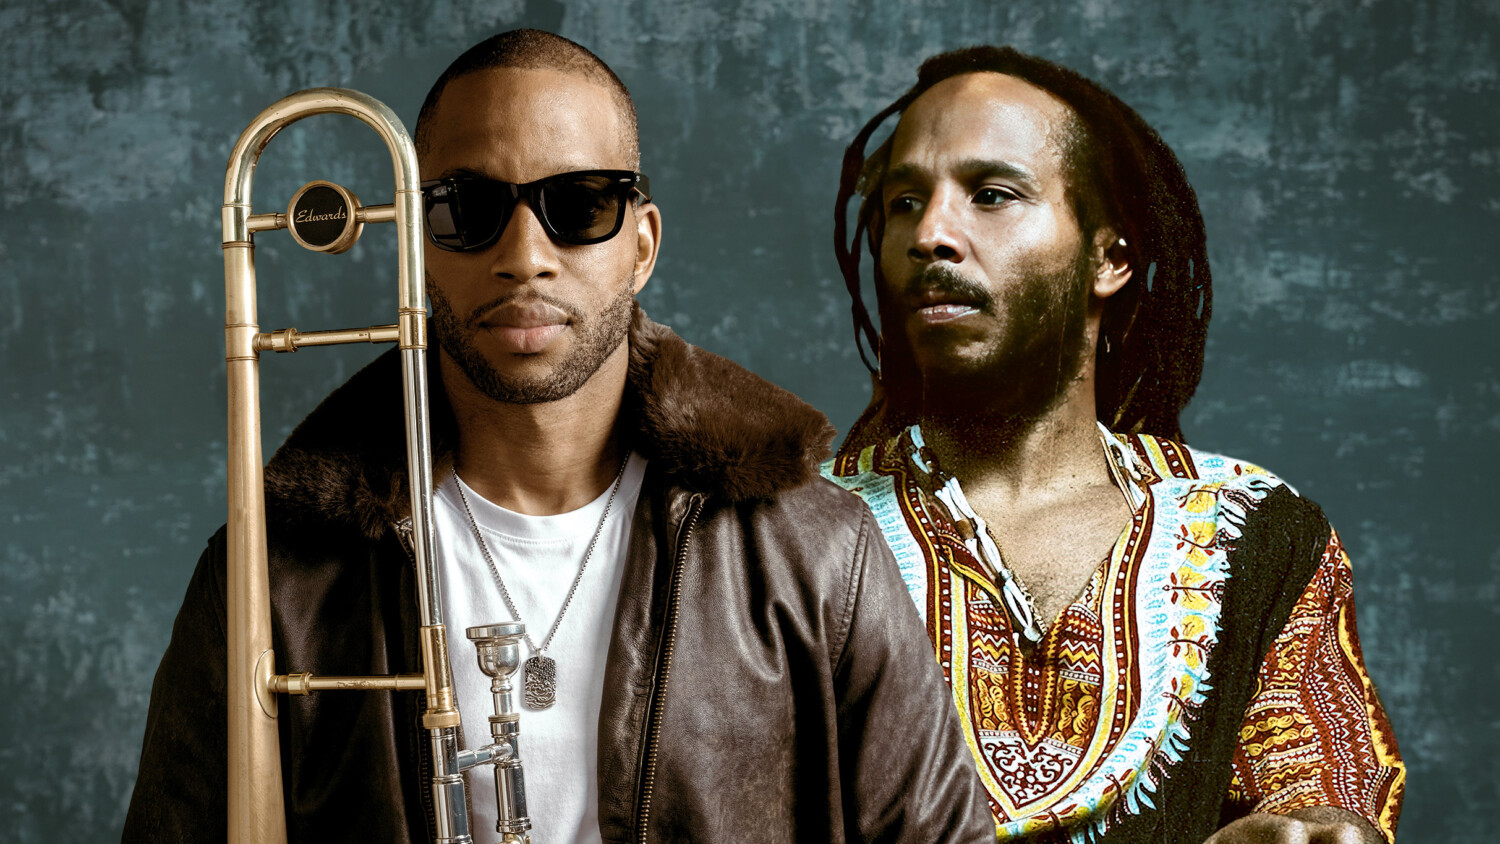 Trombone Shorty & Orleans Avenue and Ziggy Marley